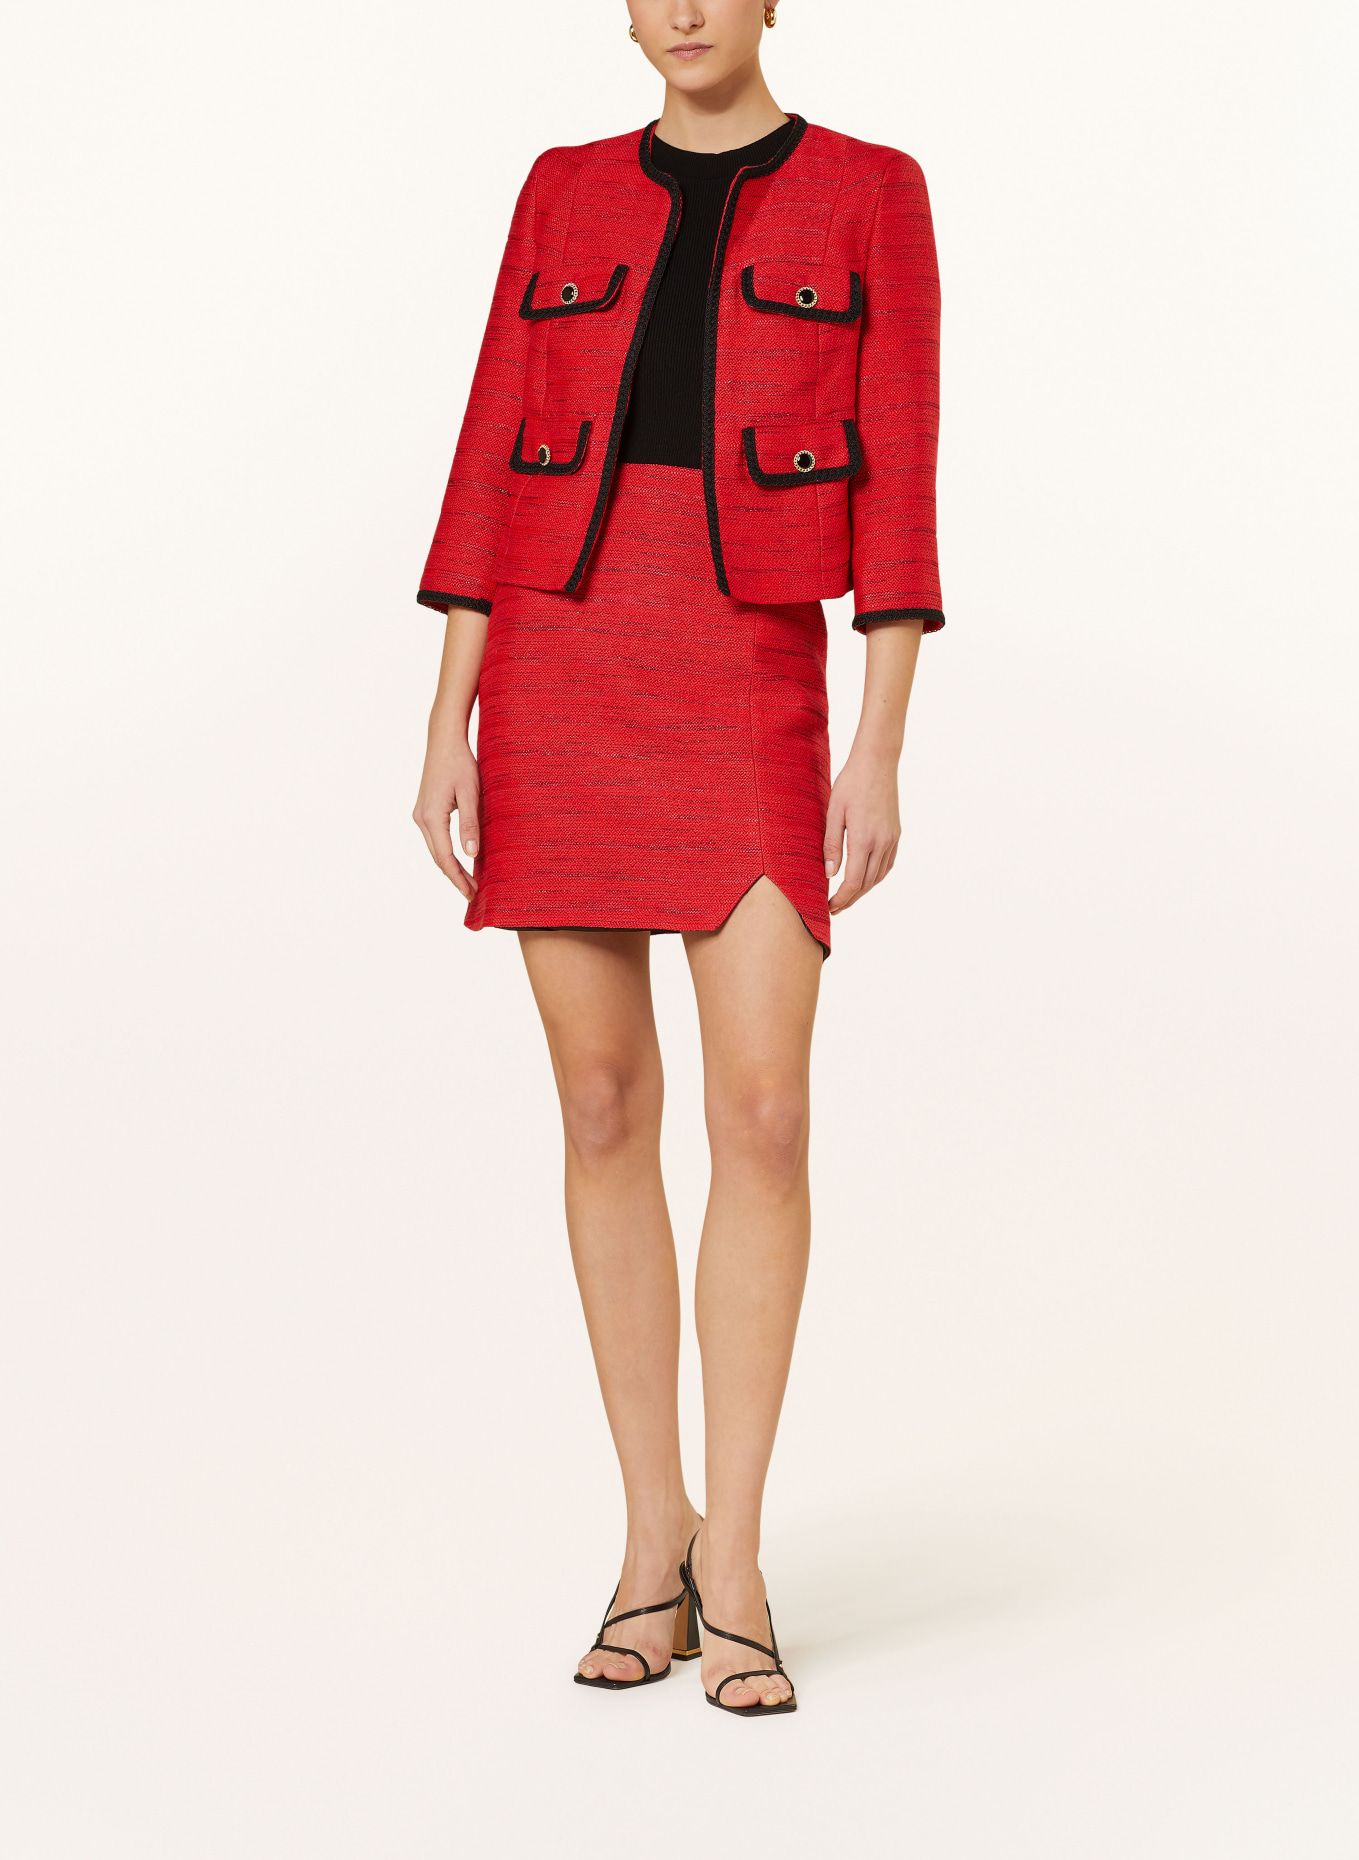 TED BAKER Boxy jacket OLIVAN made of tweed with glitter thread, Color: RED (Image 2)